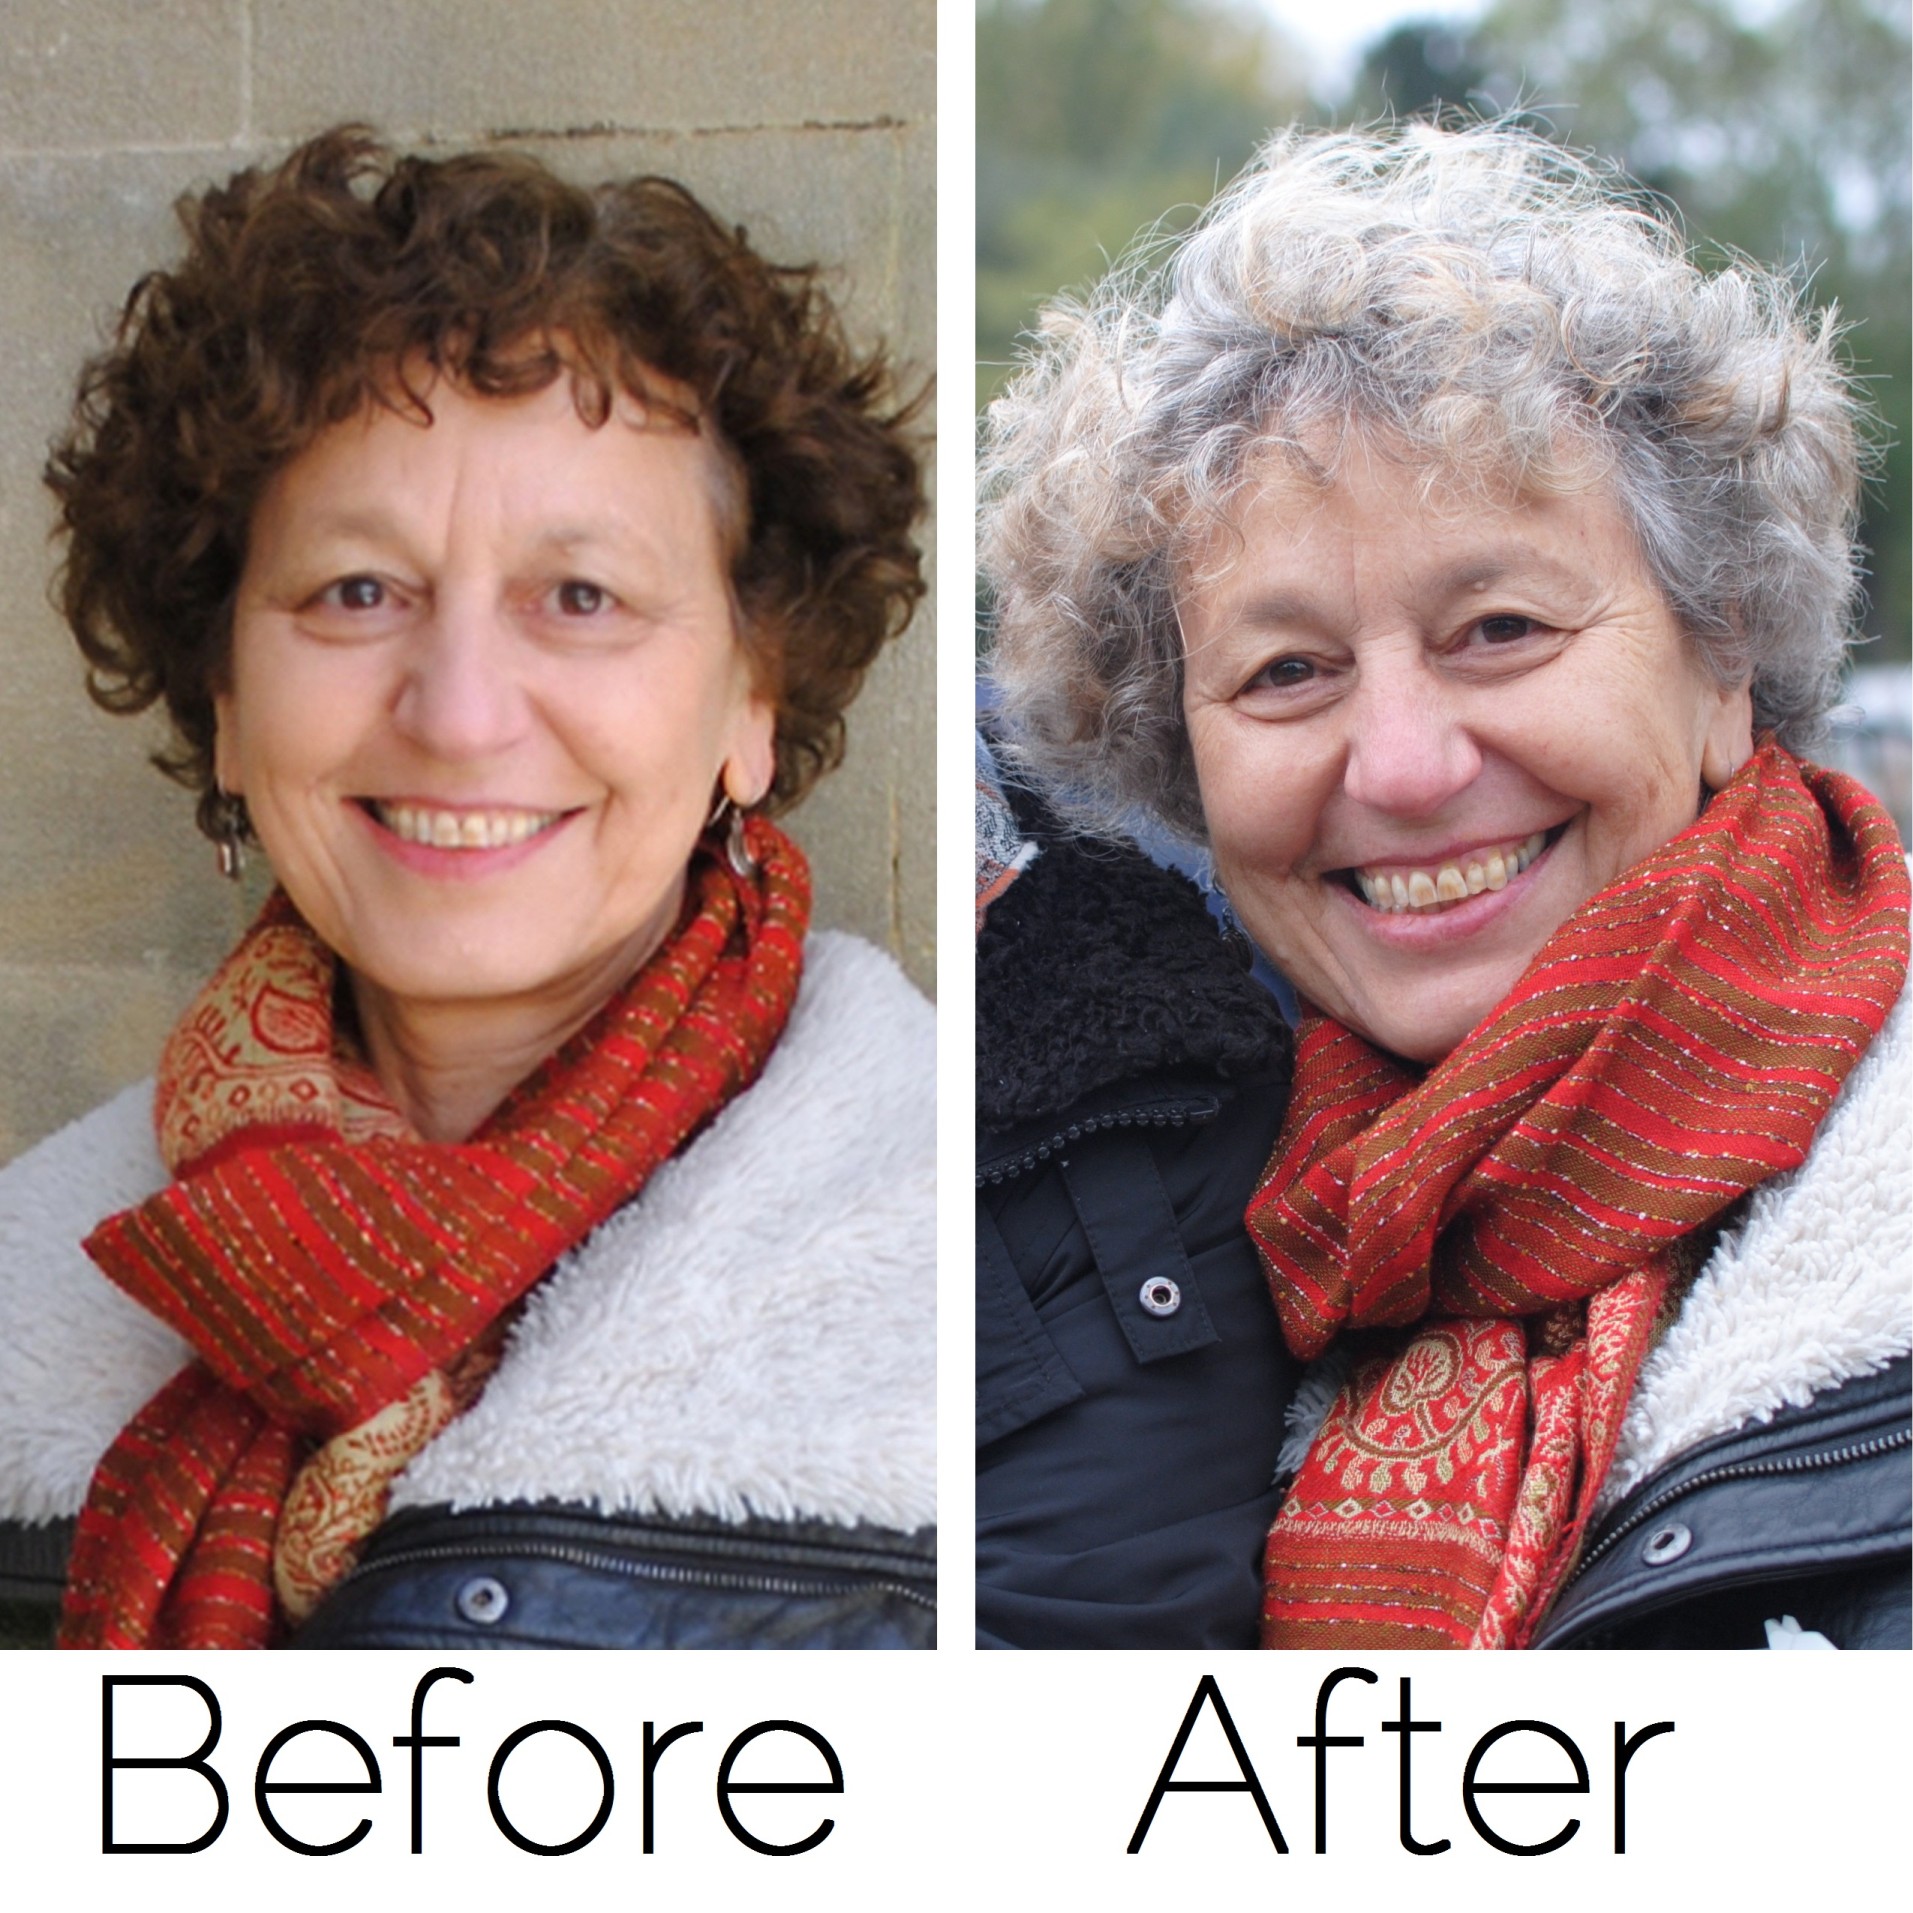 before and after photos of Julia Sherwood by Magdalena Pogorzaly and Miriam Sherwood, respectively